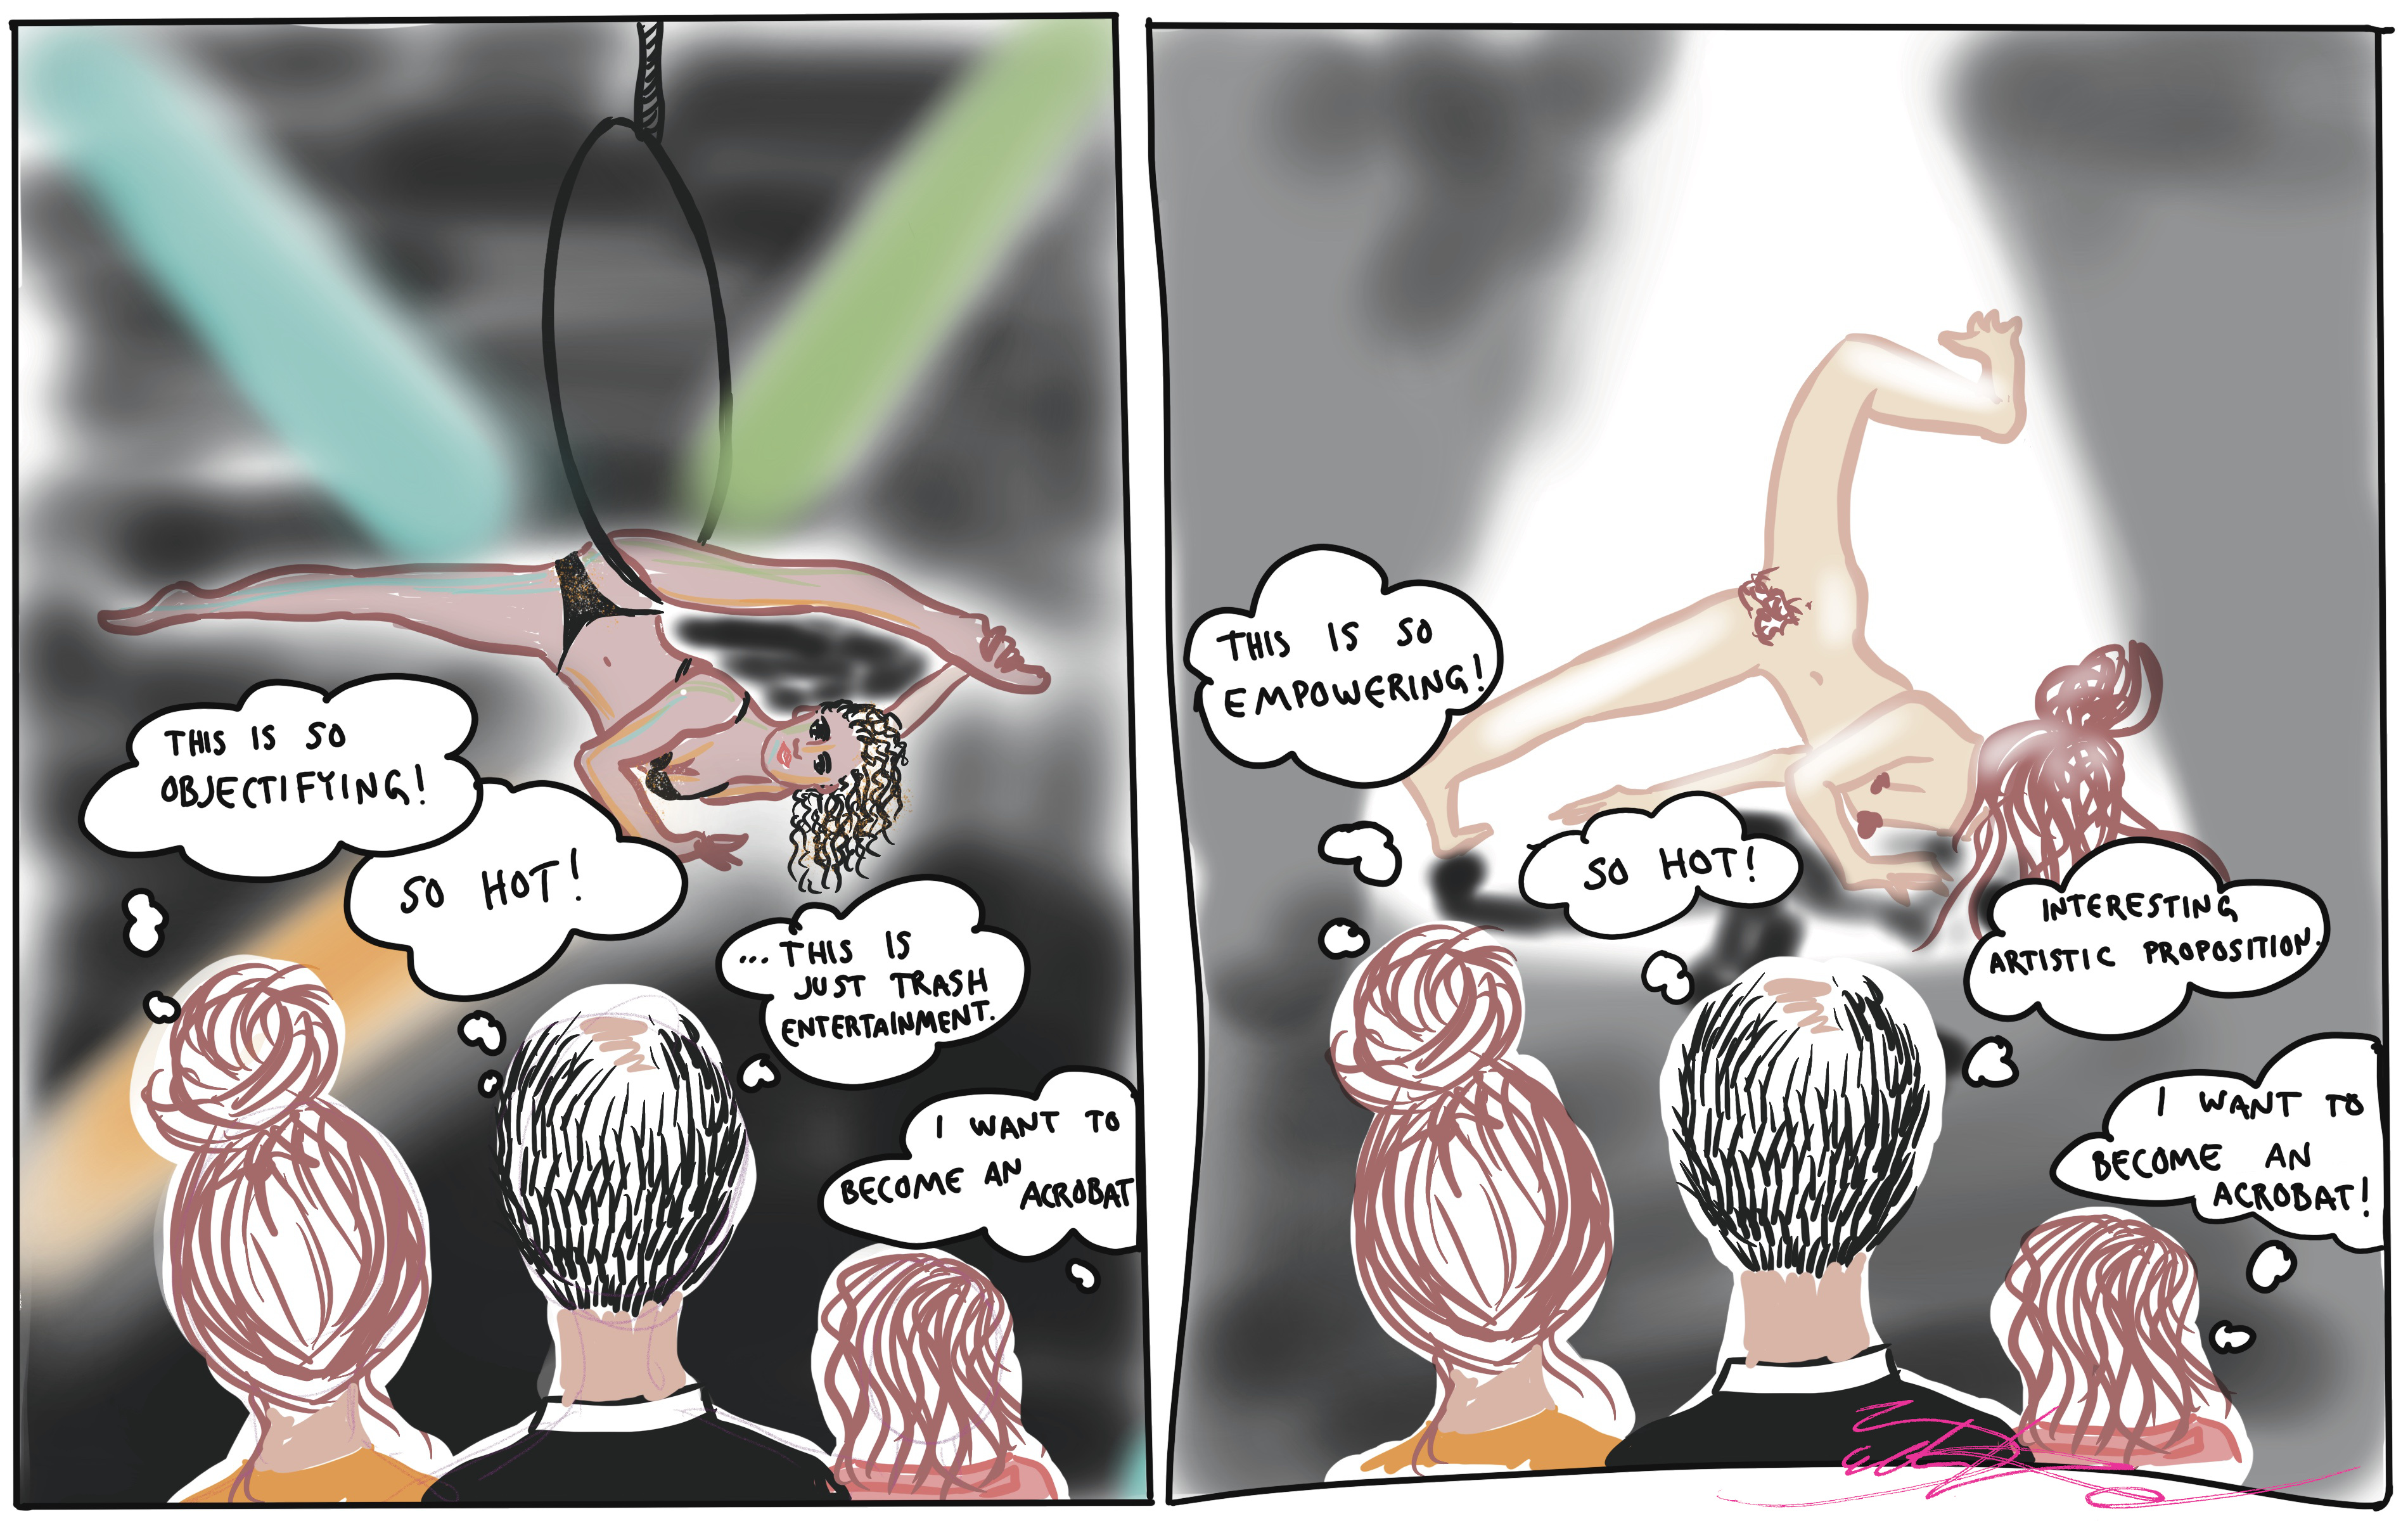 In the third illustration of the It’s not a game -series, there are two pictures. In one, a family is watching a person of color perform with the aerial hoop in colorful lights. The performer is wearing a small bikini as a costume. ”This is so objectifying” thinks the mother. ”So hot, but this is just trash entertainment” thinks the father. ”I want to become an acrobat” thinks the child. In the second picture, the same family is watching a naked white woman performing movements in a white light. ”This is so empowering” thinks the mother. ”So hot, interesting artistic proposition” thinks the father. ”I want to become an acrobat” thinks the child.